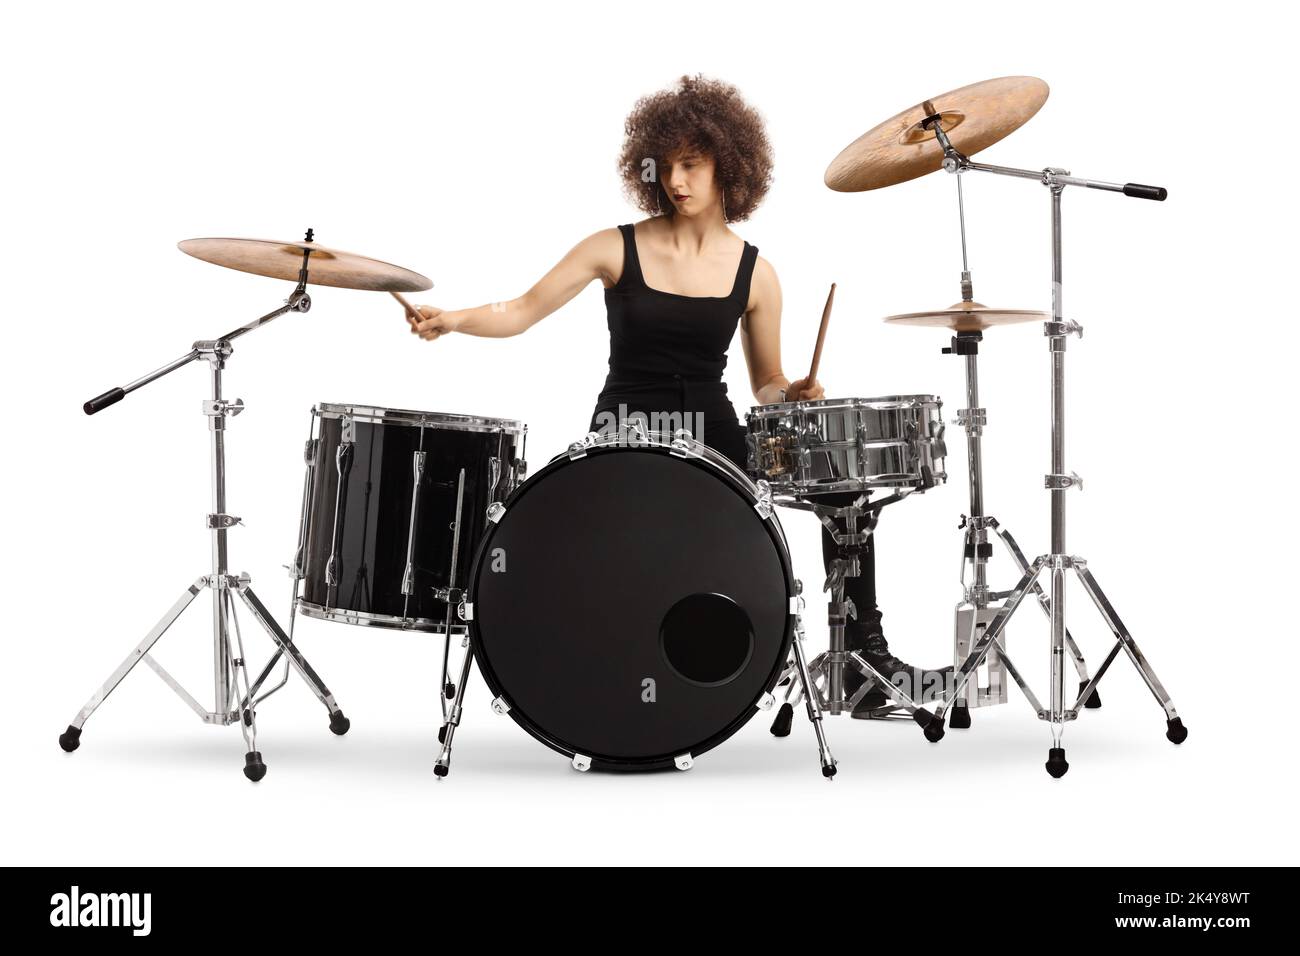 Female rock musician playing drums isolated on white background Stock Photo